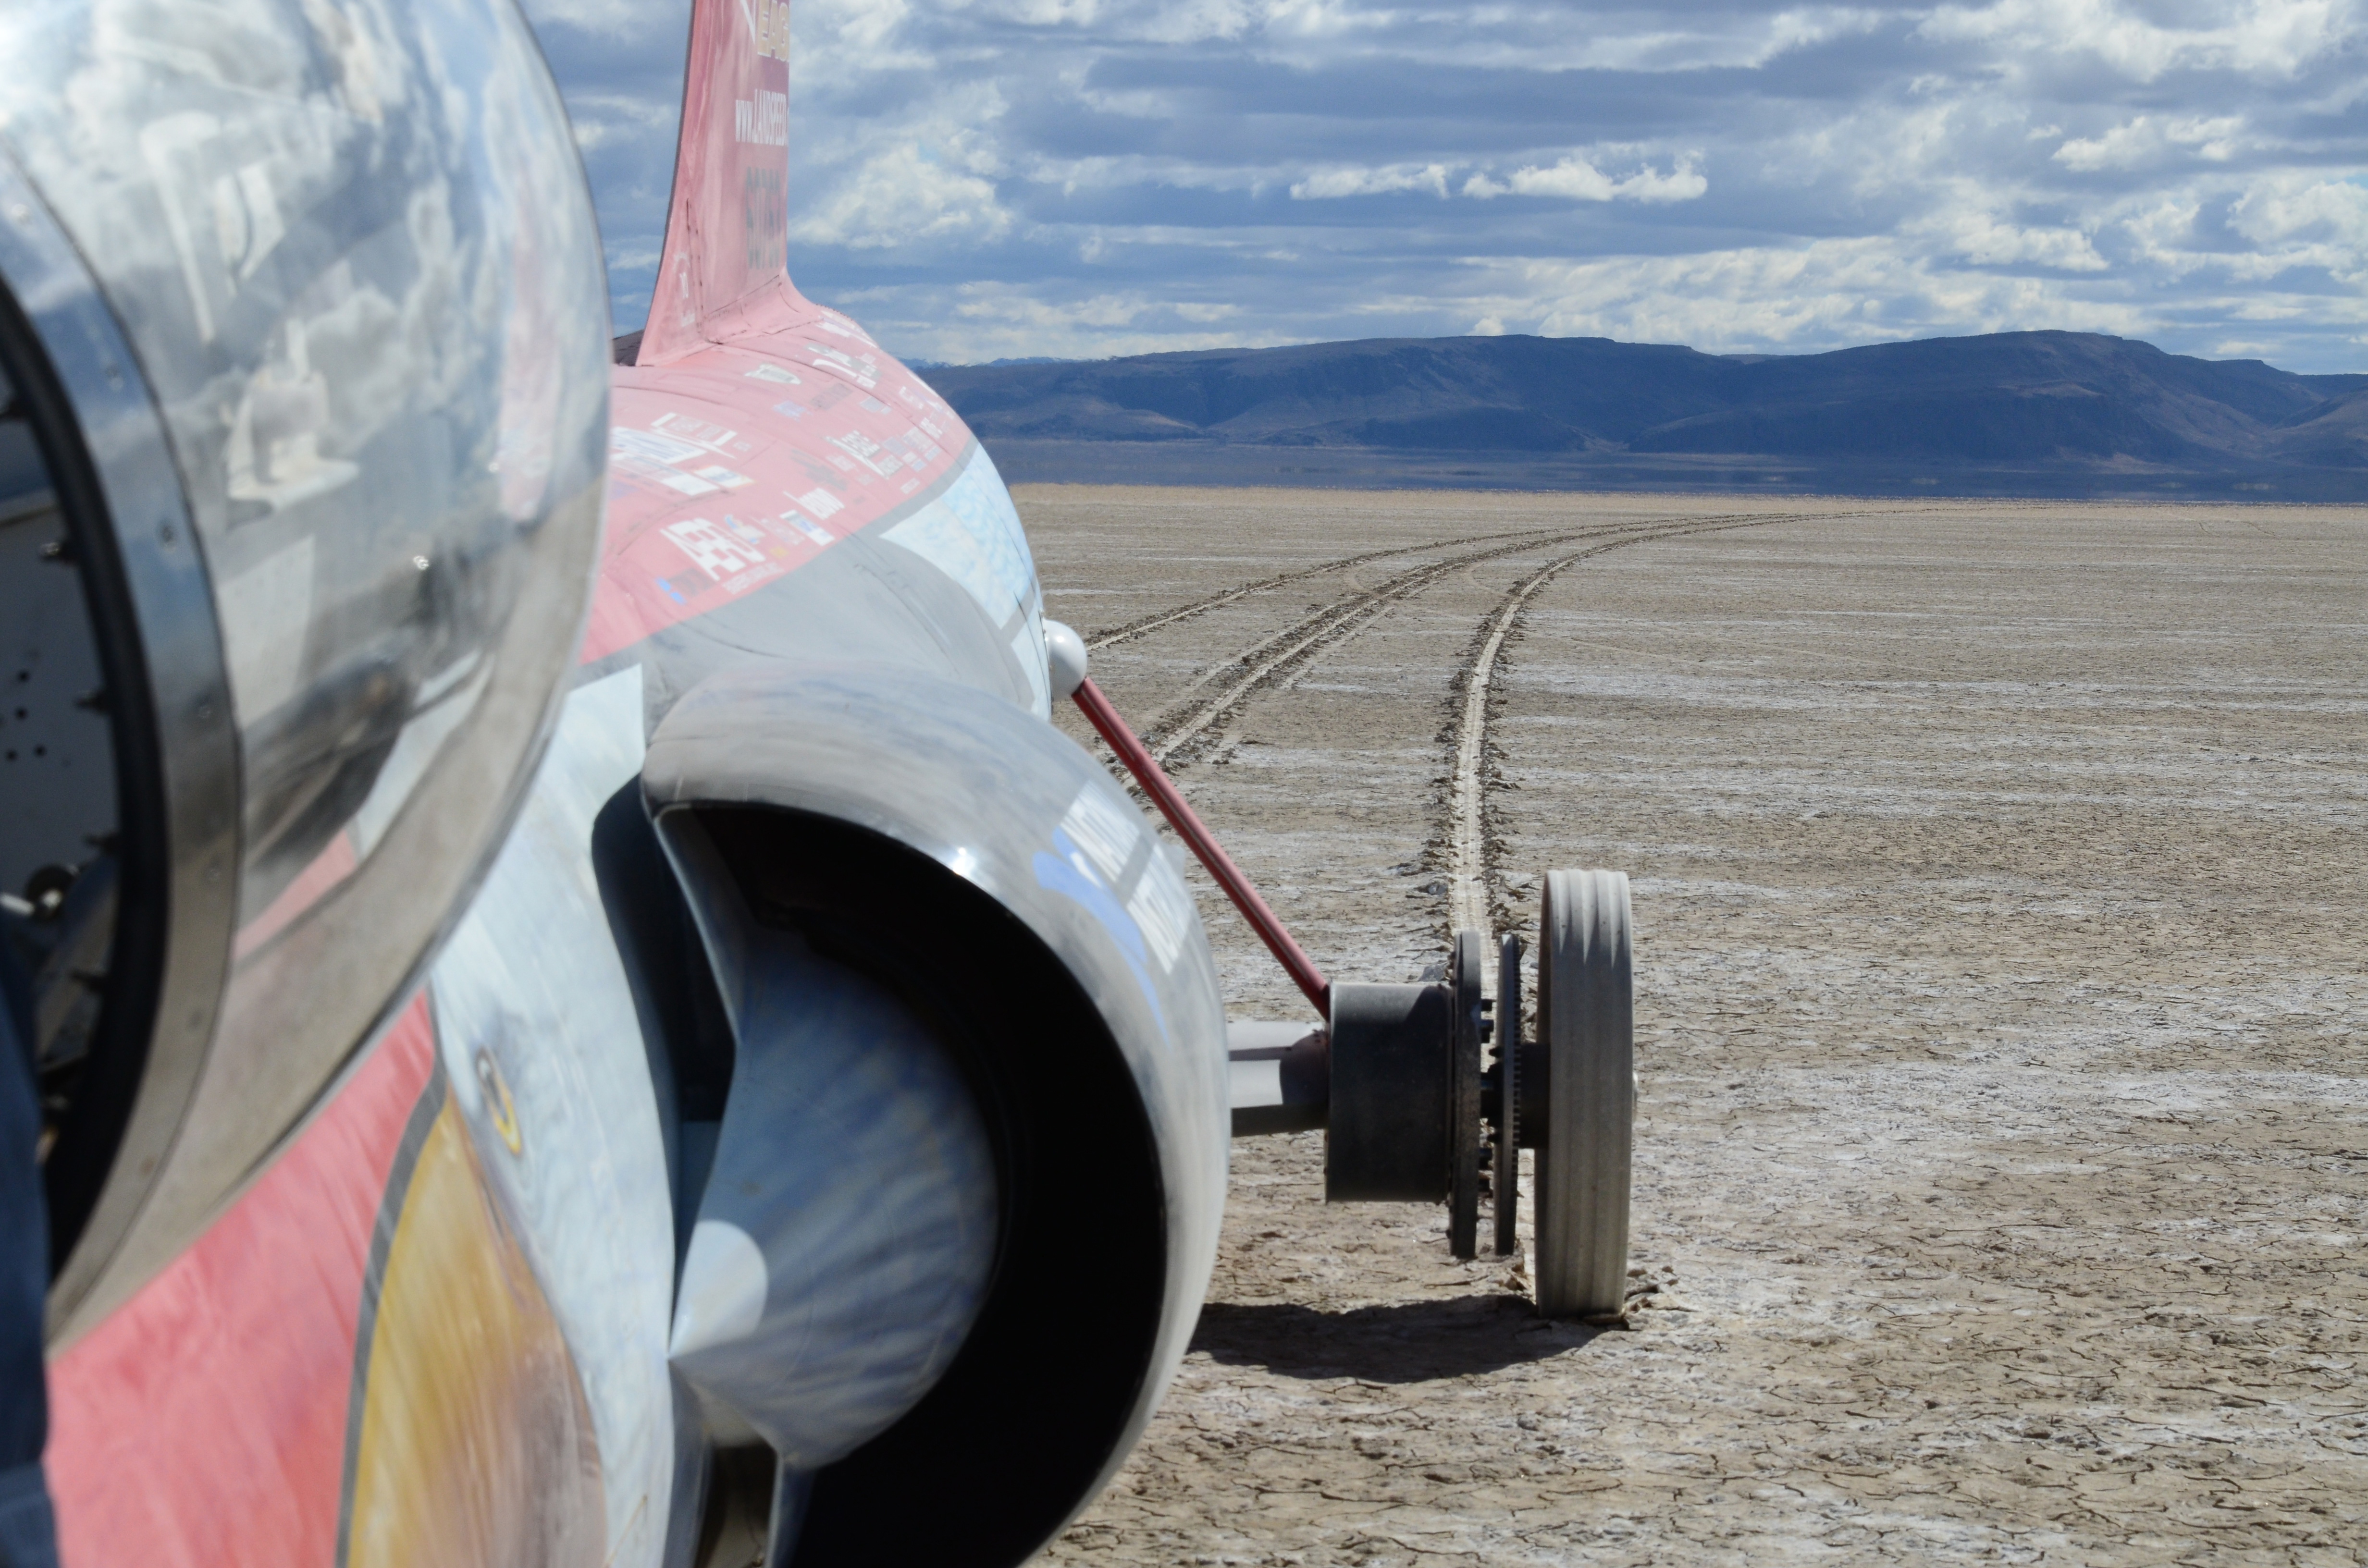 The quest for speed is a balancing act between keeping the jet-powered car from taking flight, while also preventing it from sinking into the desert.